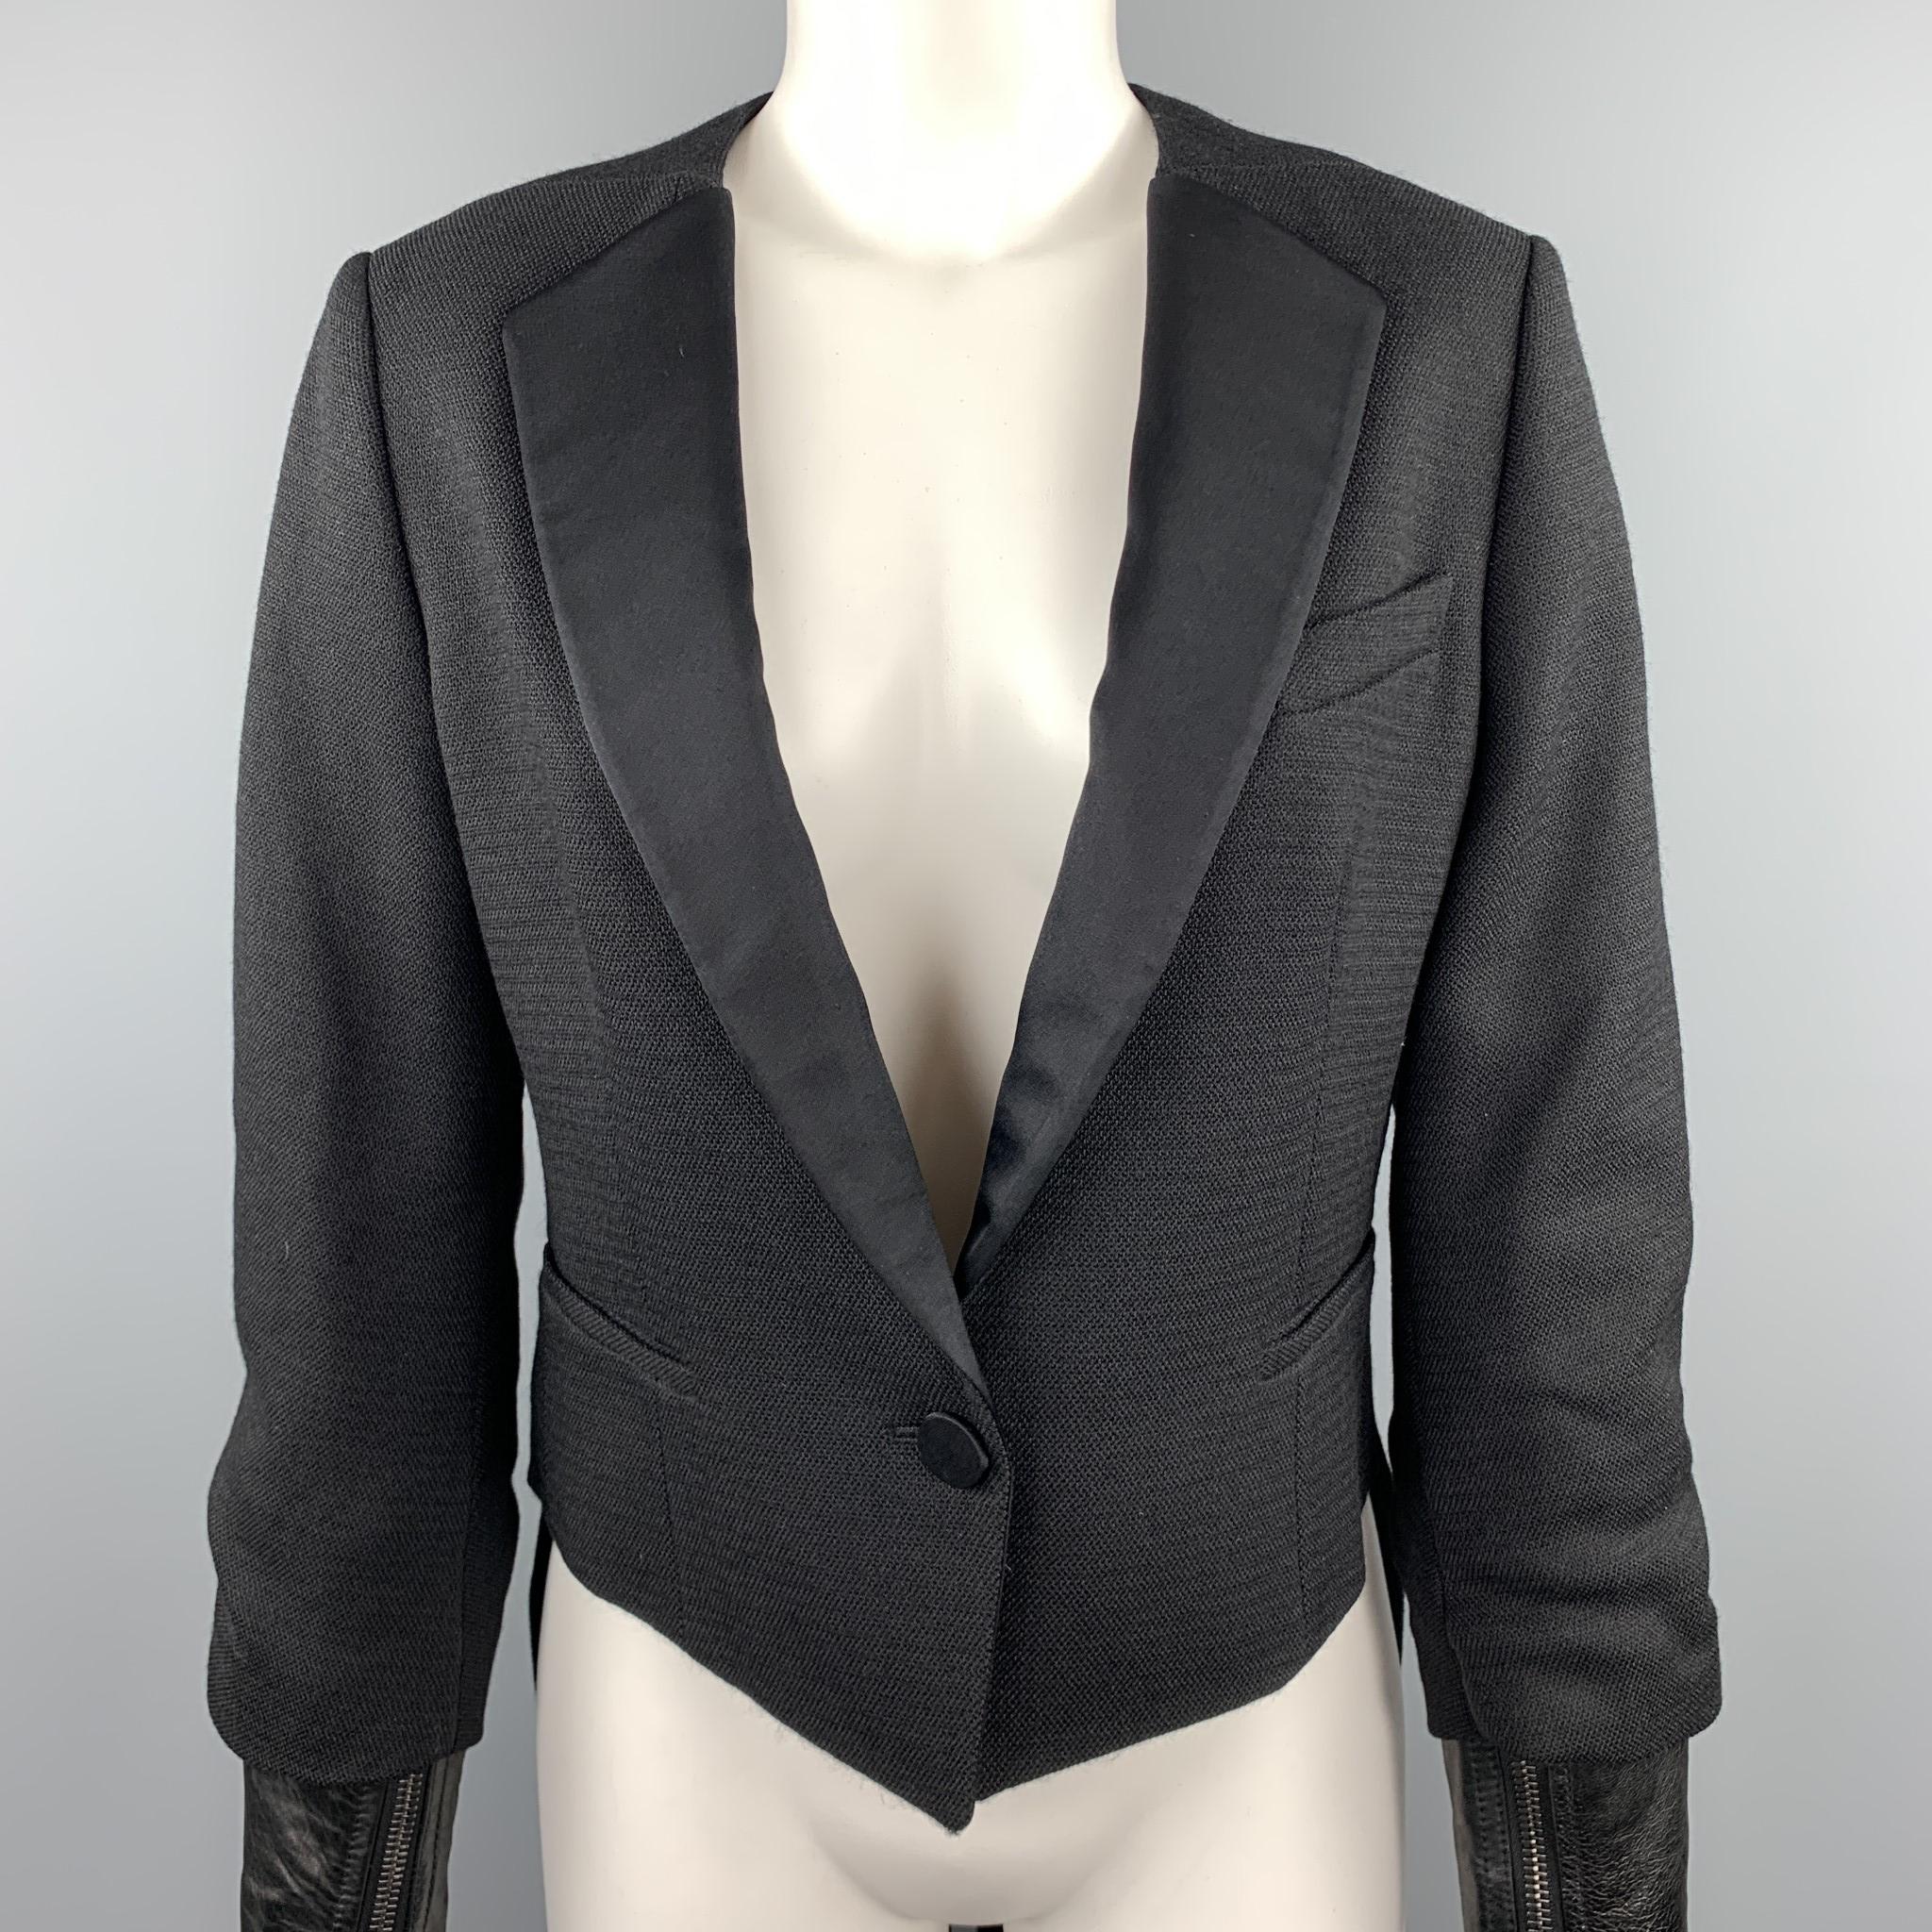 3.1 PHILLIP LIM jacket comes in woven wool with a collarless satin tuxedo notch lapel, single button front, double coat tails back, and detachable leather biker jacket cuffs.  Retailed $830

Excellent Pre-Owned Condition.
Marked: US